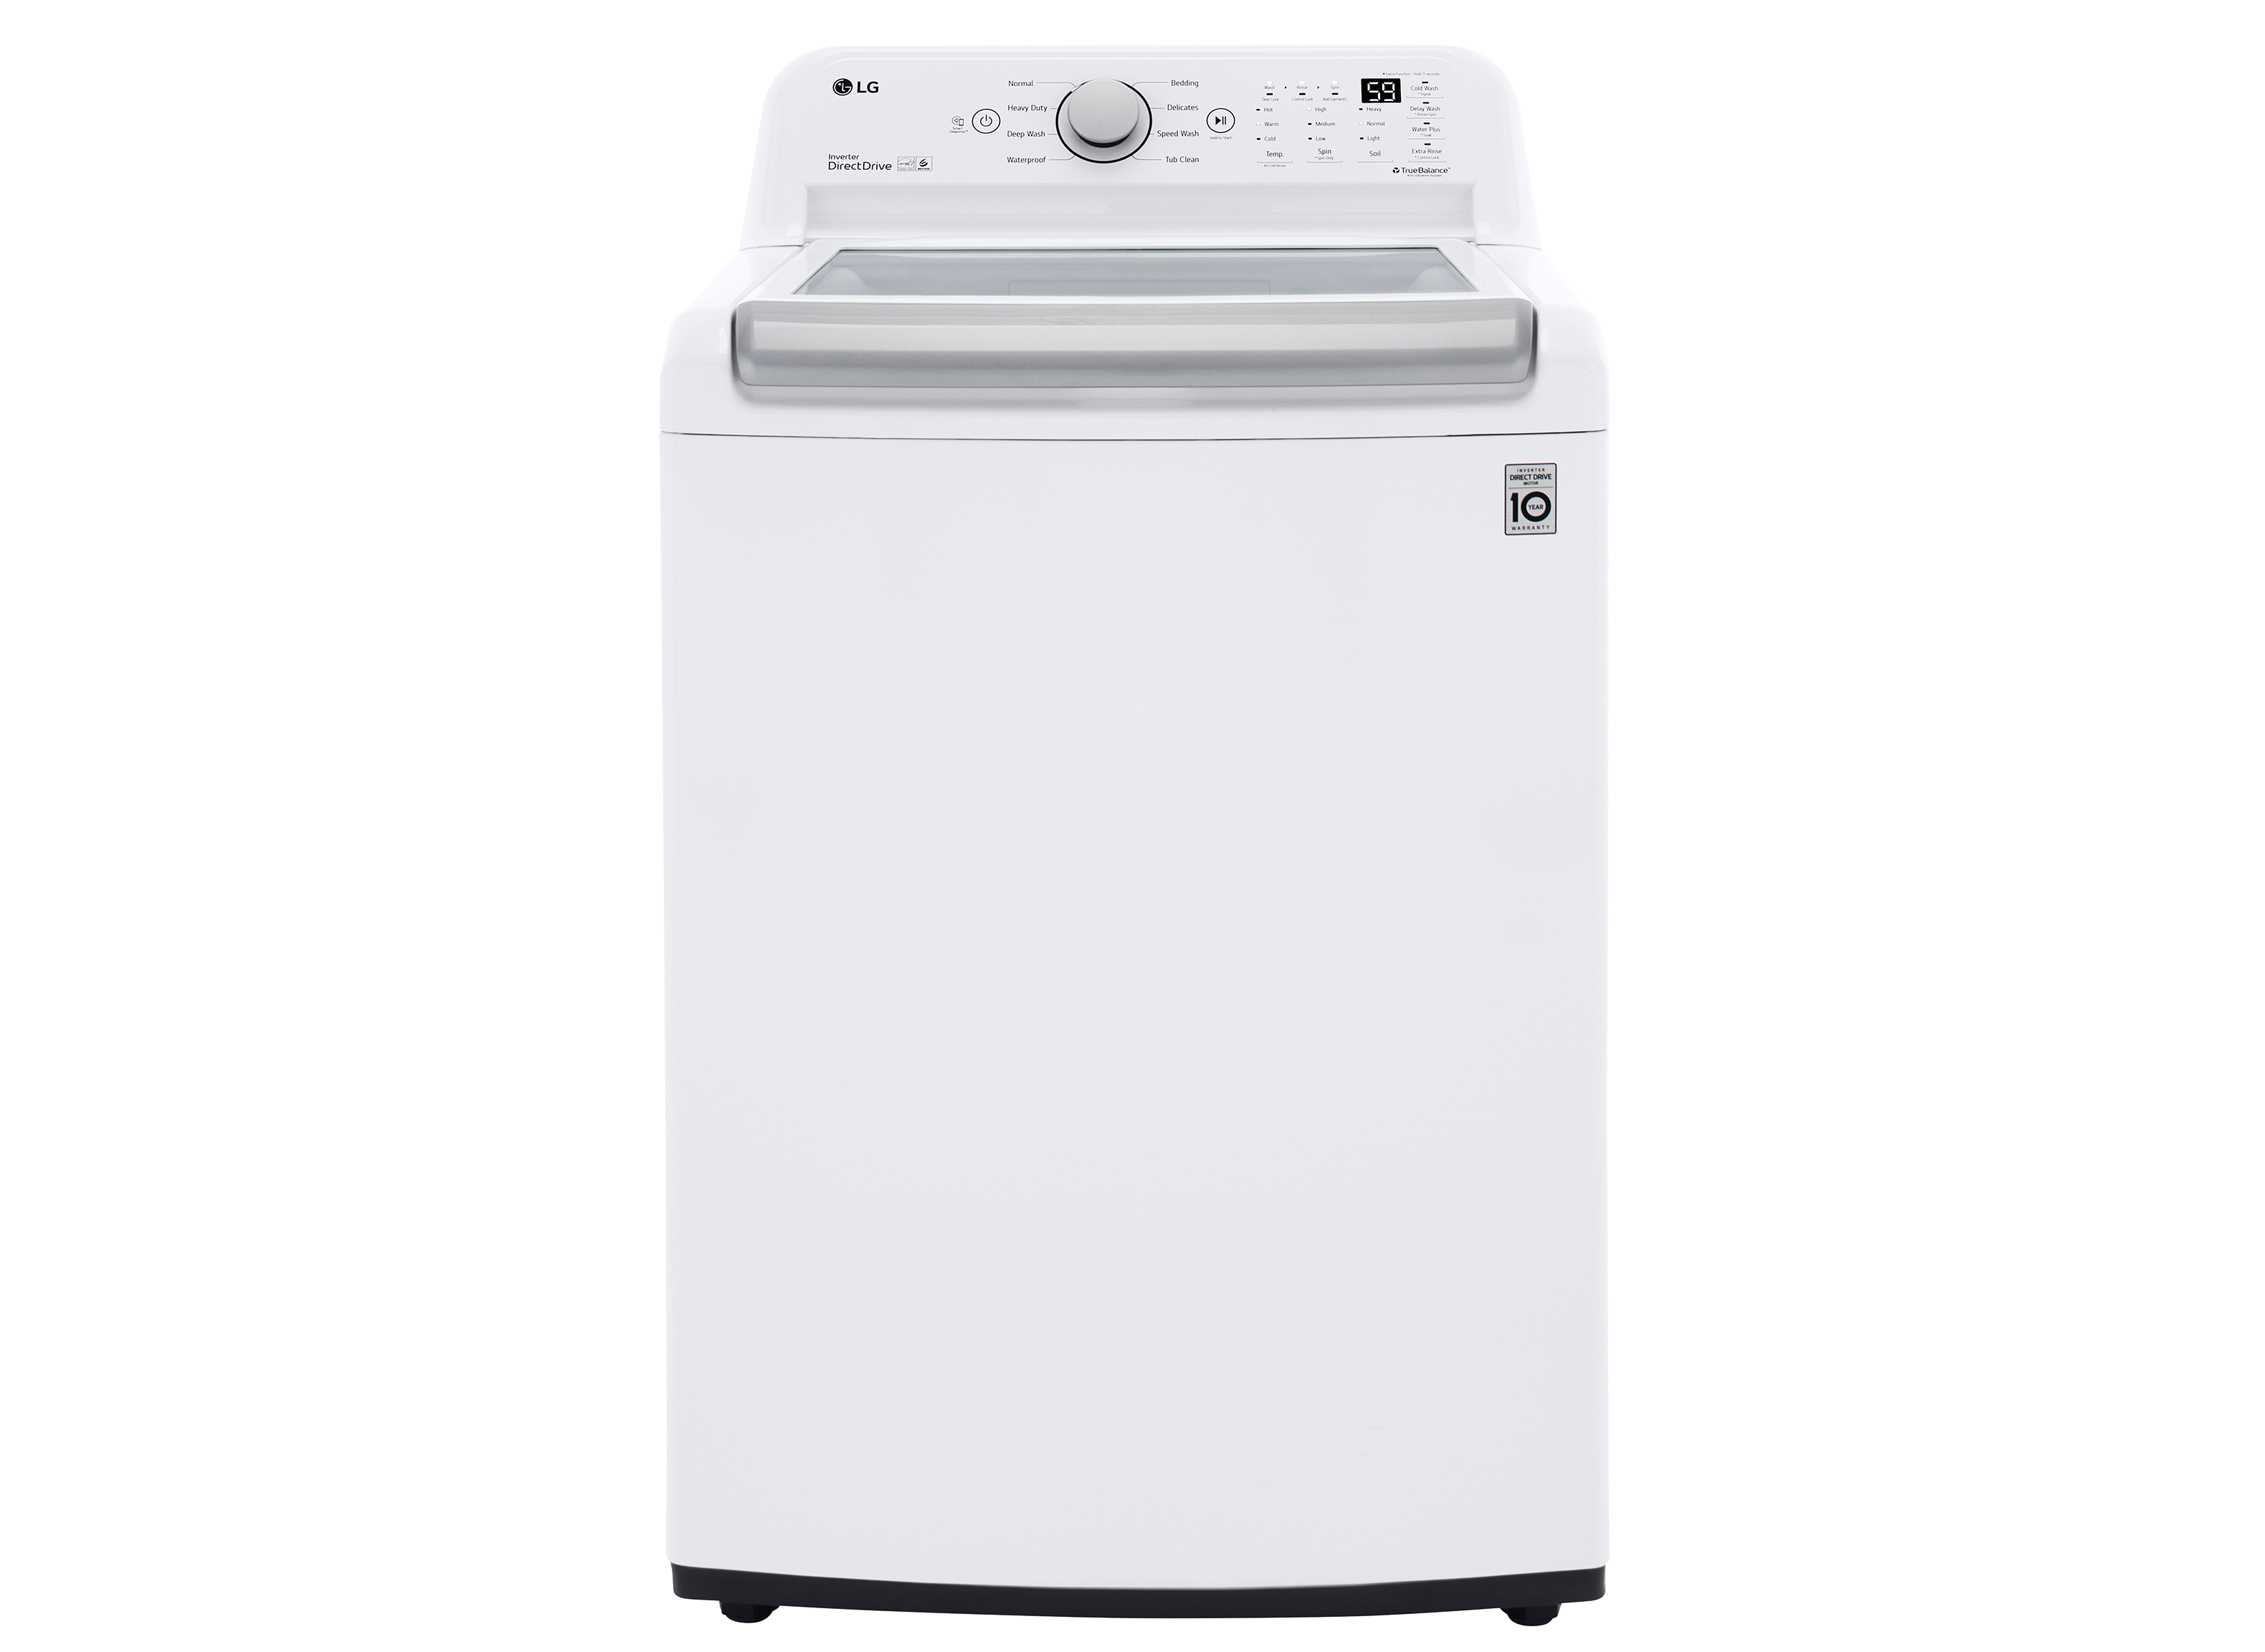 Where is the lint trap on this top loading washer? : r/Home